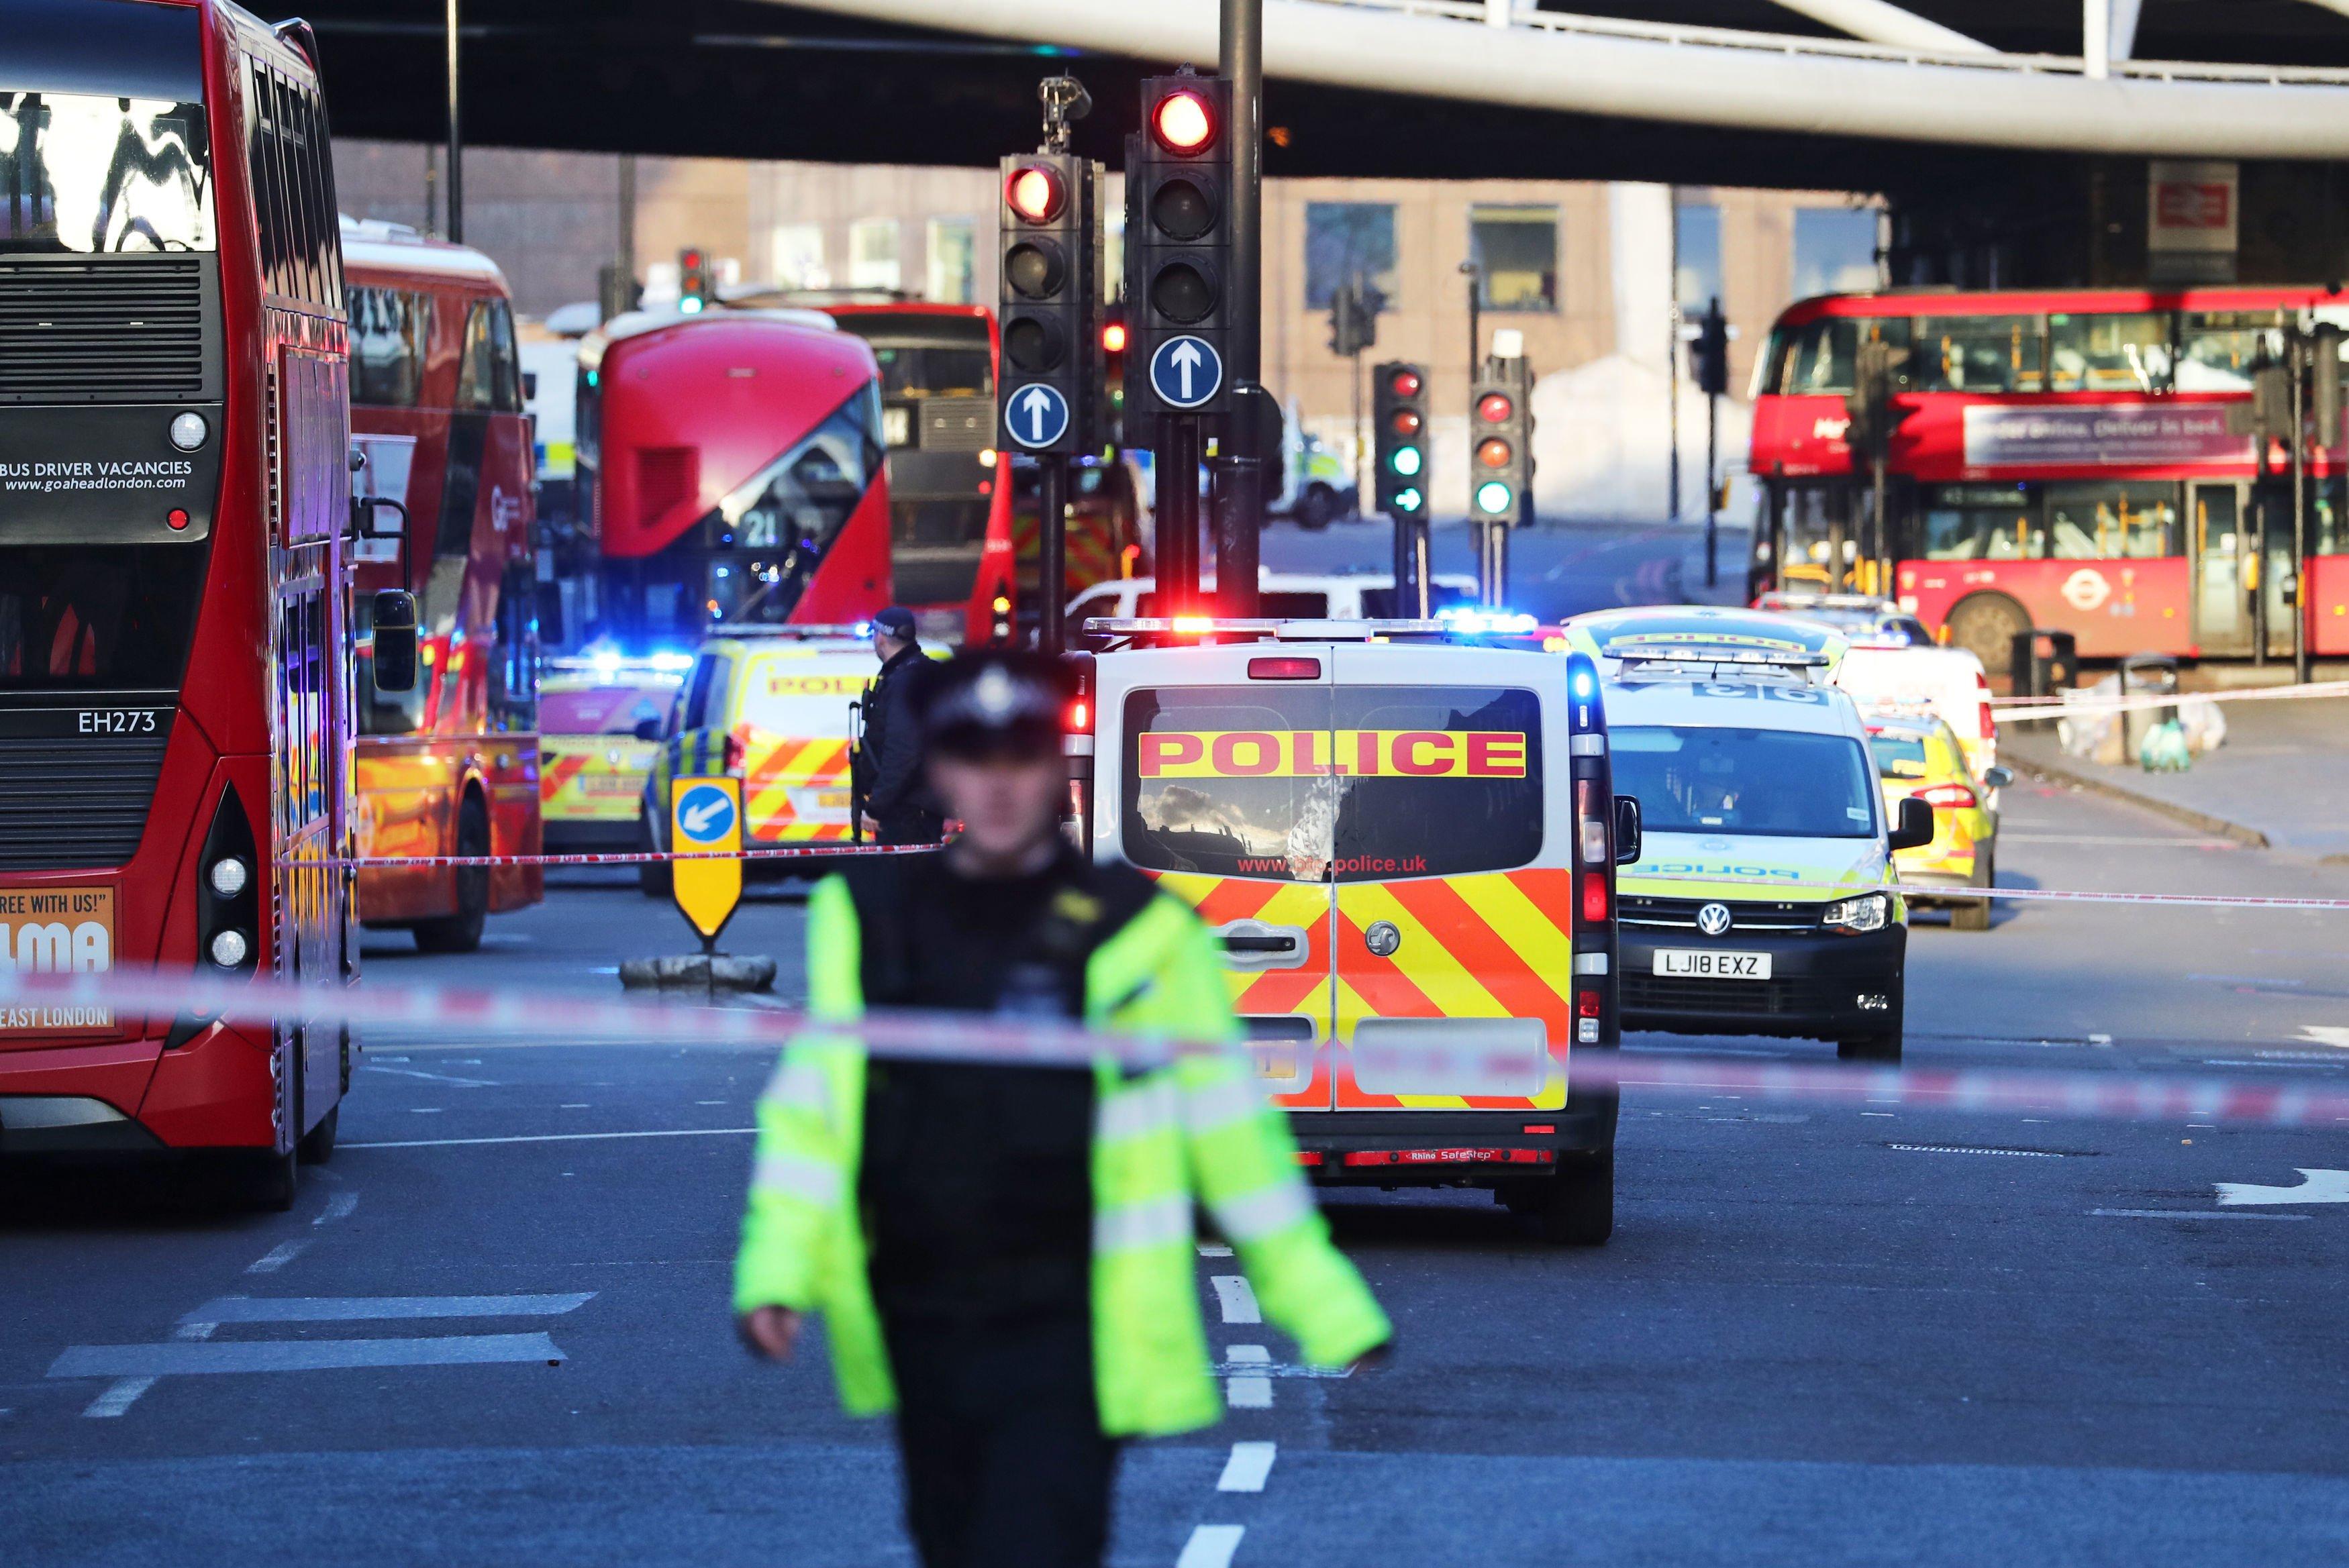 Police and emergency services at the scene of an incident on London Bridge in central London. PA Photo. Picture date: Friday November 29, 2019. See PA story POLICE LondonBridge. Photo credit should read: Gareth Fuller/PA Wire